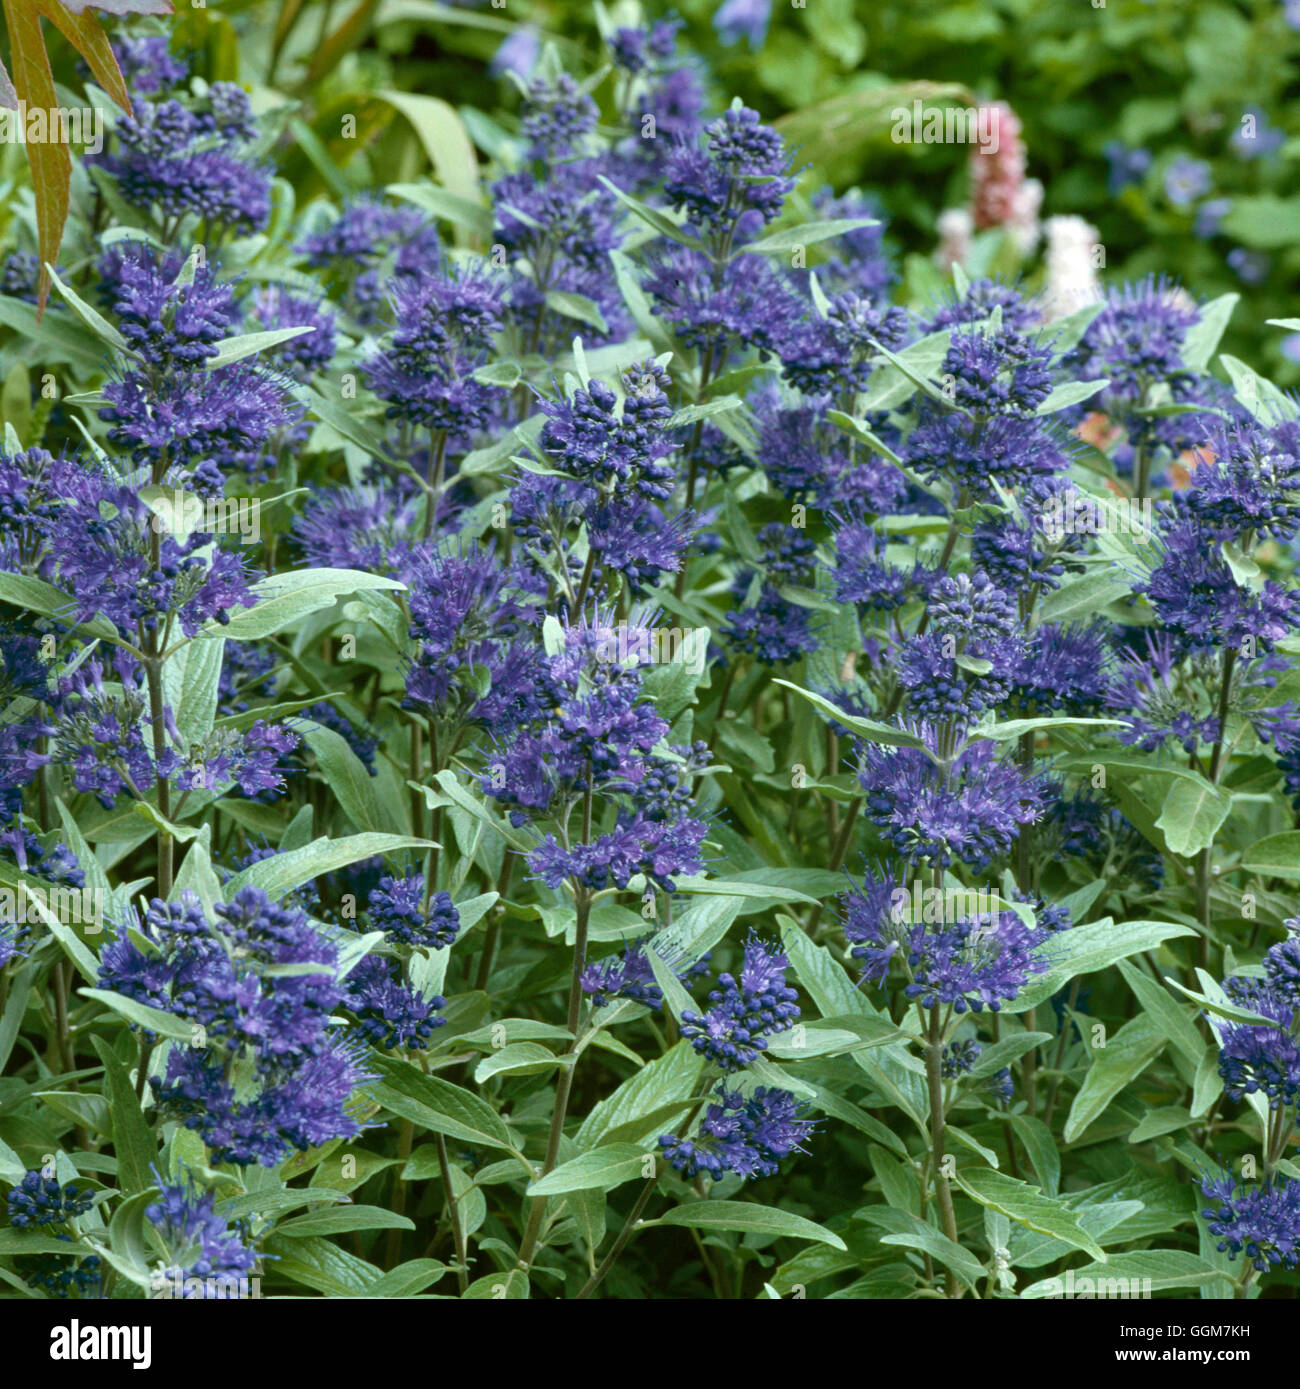 Caryopteris x clandonensis 'Heavenly Blue' - TRS046389 Banque D'Images